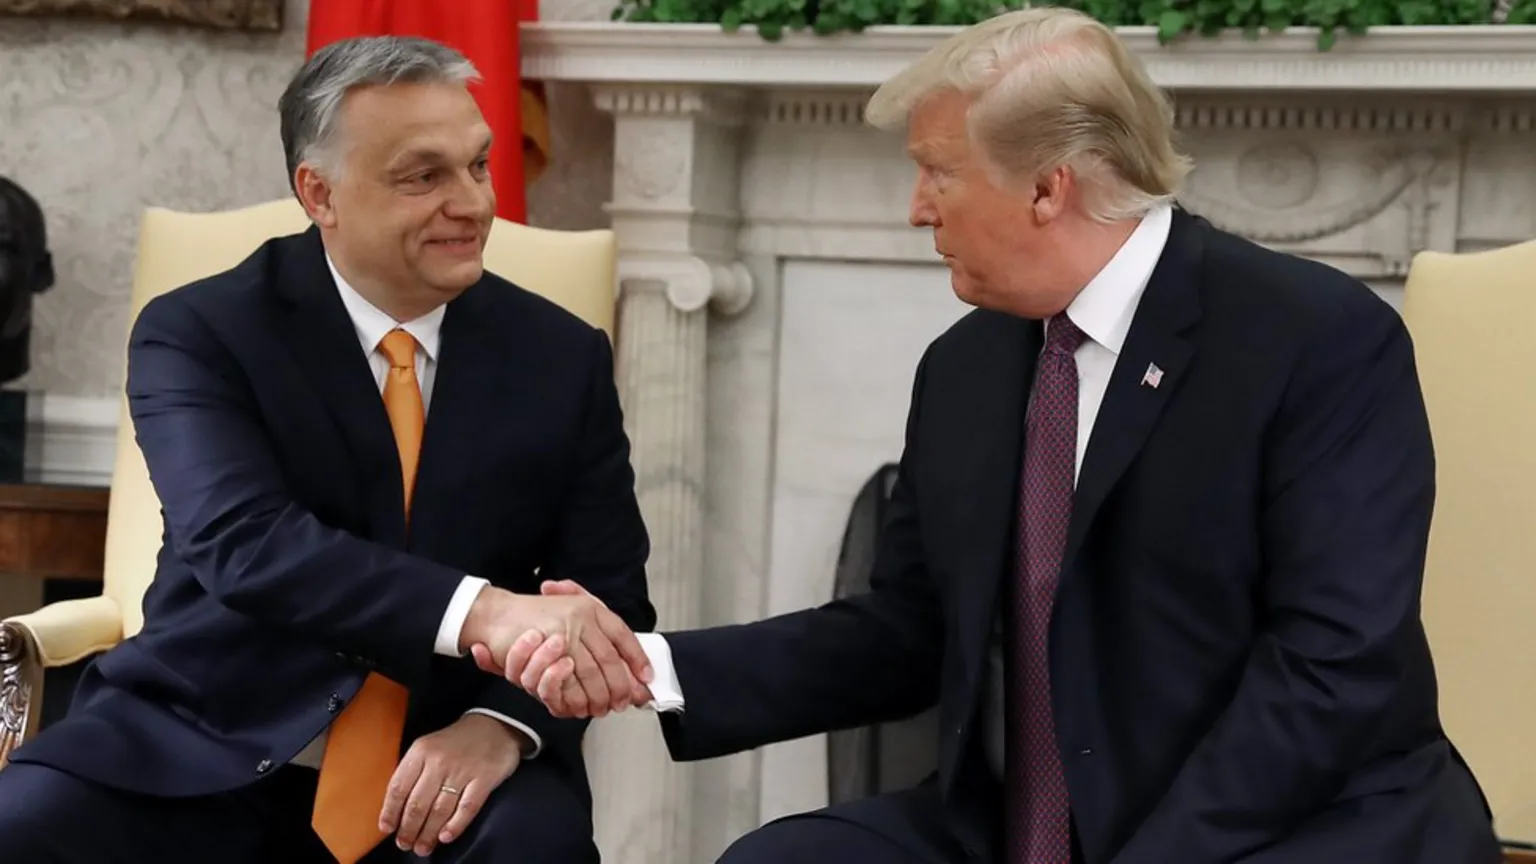 Trump will not give a penny to Ukraine – Hungary PM Orban (bbc.com)